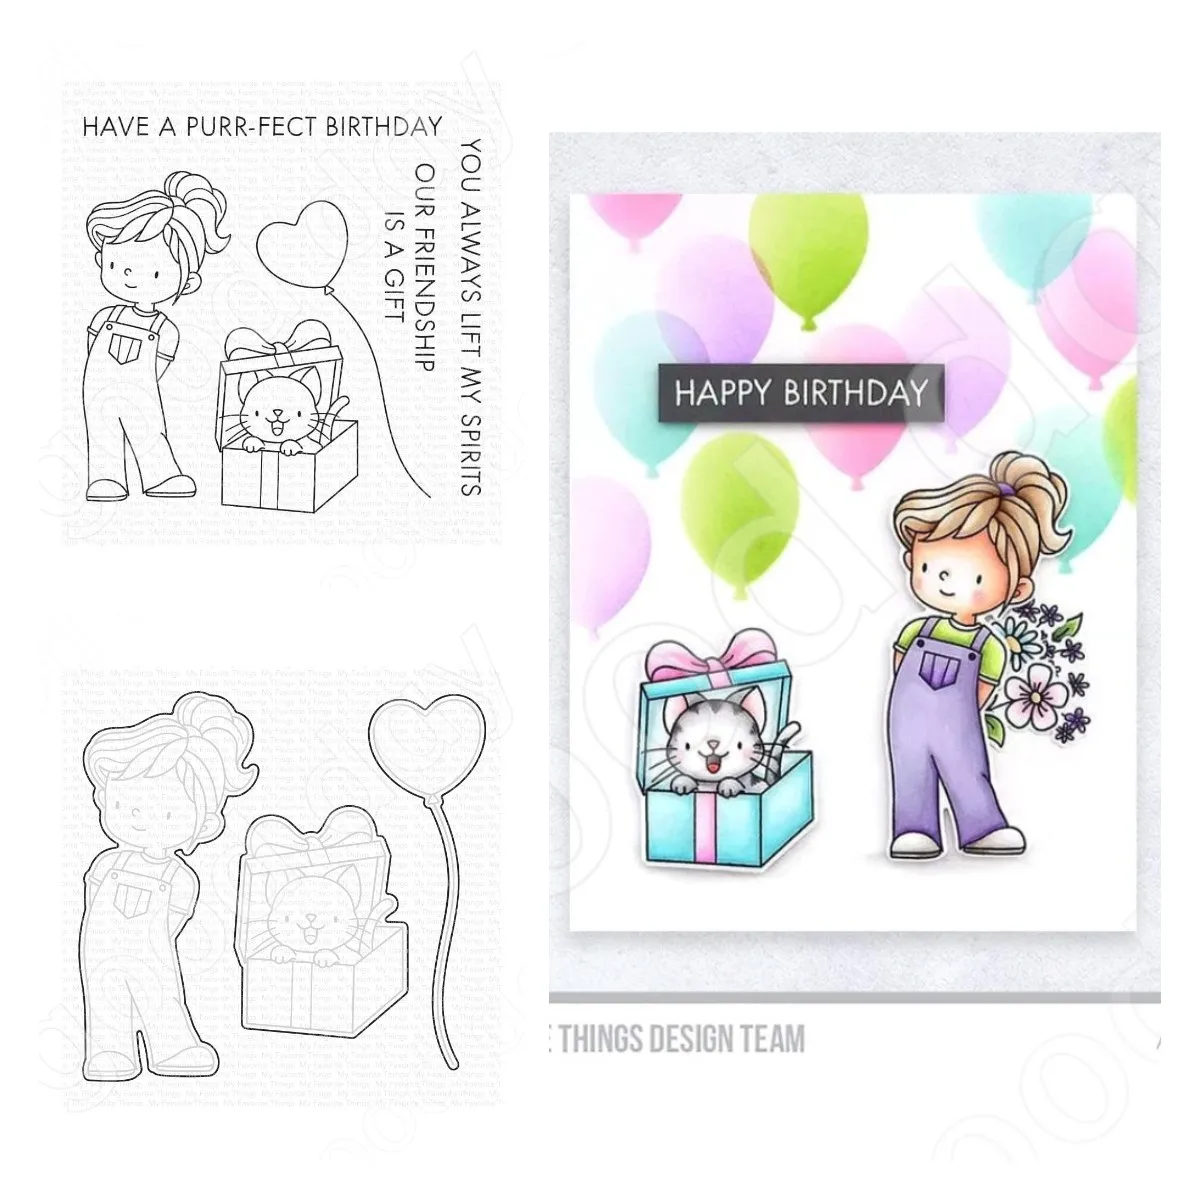 

Arrival Purr-fect Birthday Cutting Dies Stamps Scrapbook Diary Decoration Stencil Embossing Template Diy Greeting Card Handmade